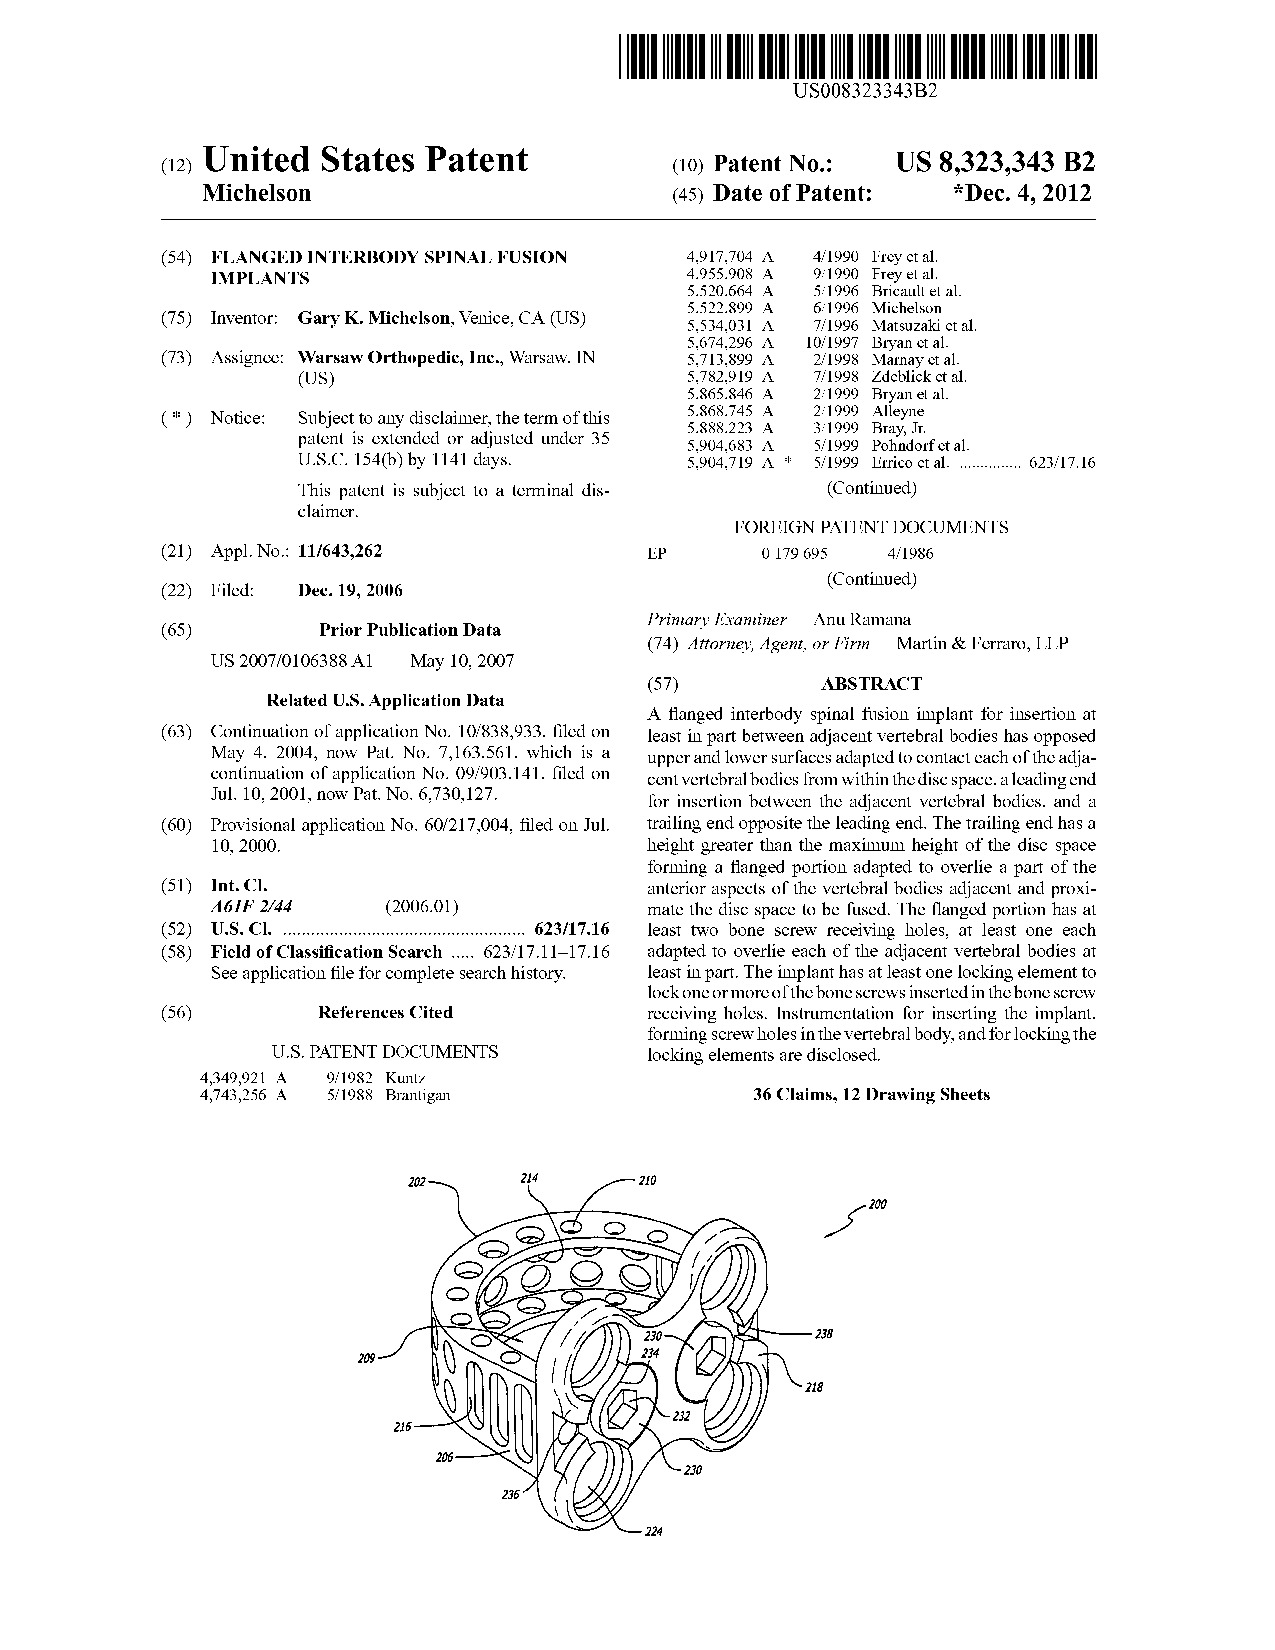 Flanged interbody spinal fusion implants - Patent 8,323,343